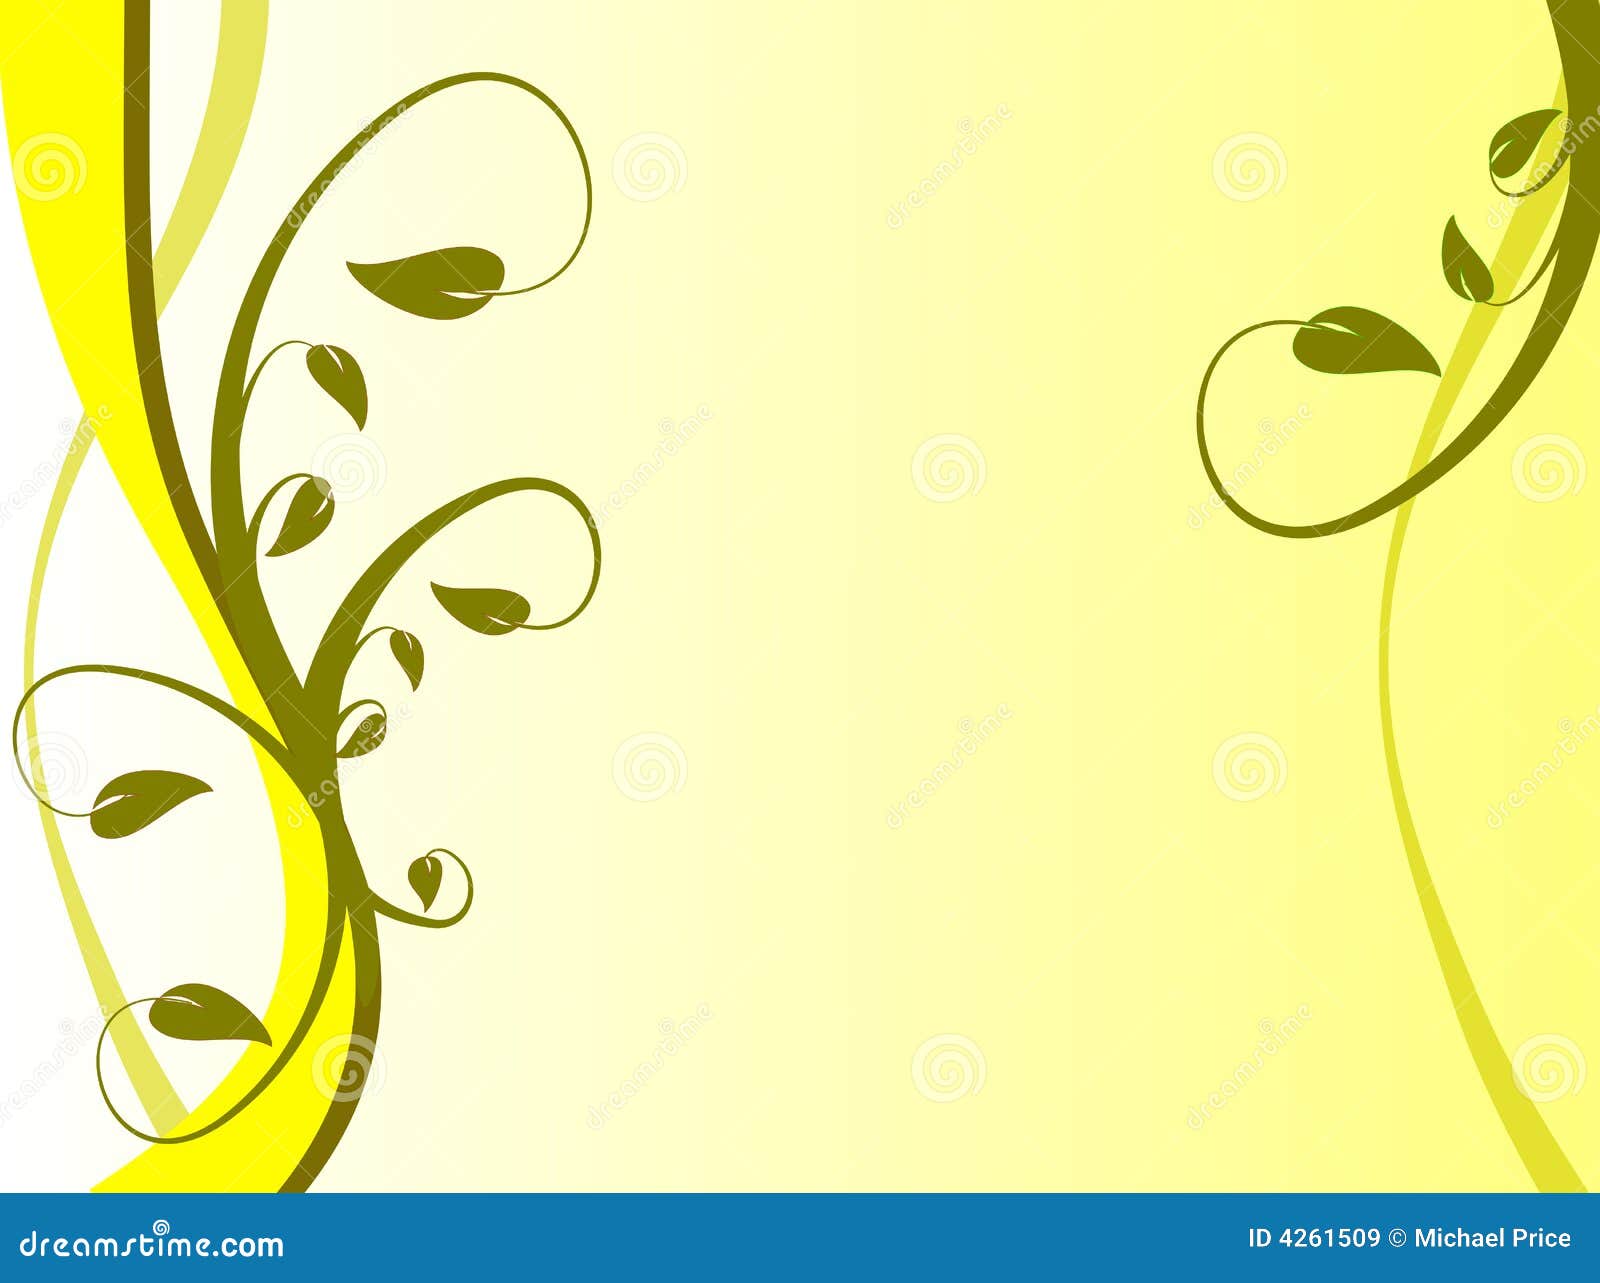 Yellow floral Background stock vector. Illustration of leaf - 4261509